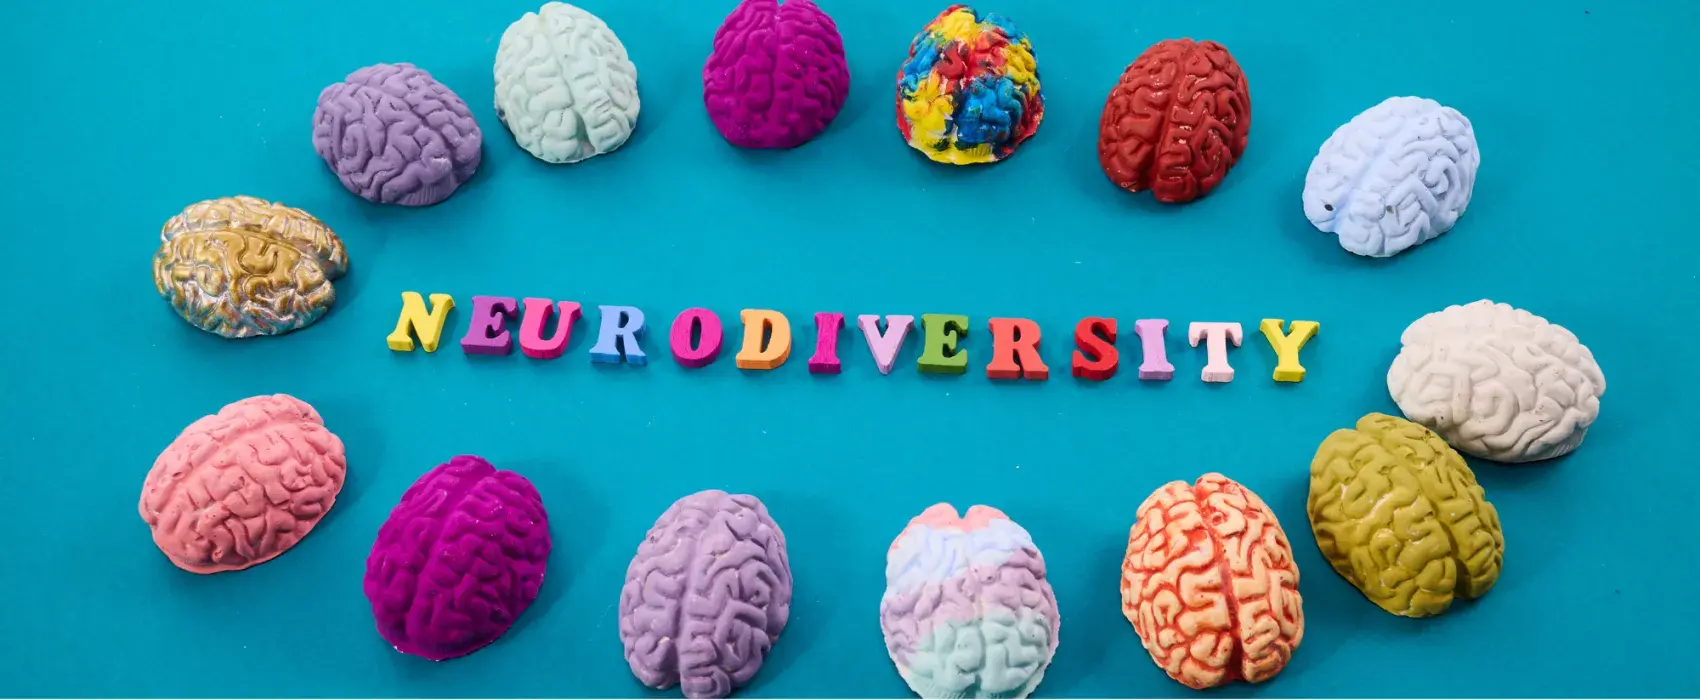 Neurodiversity with different coloured brains